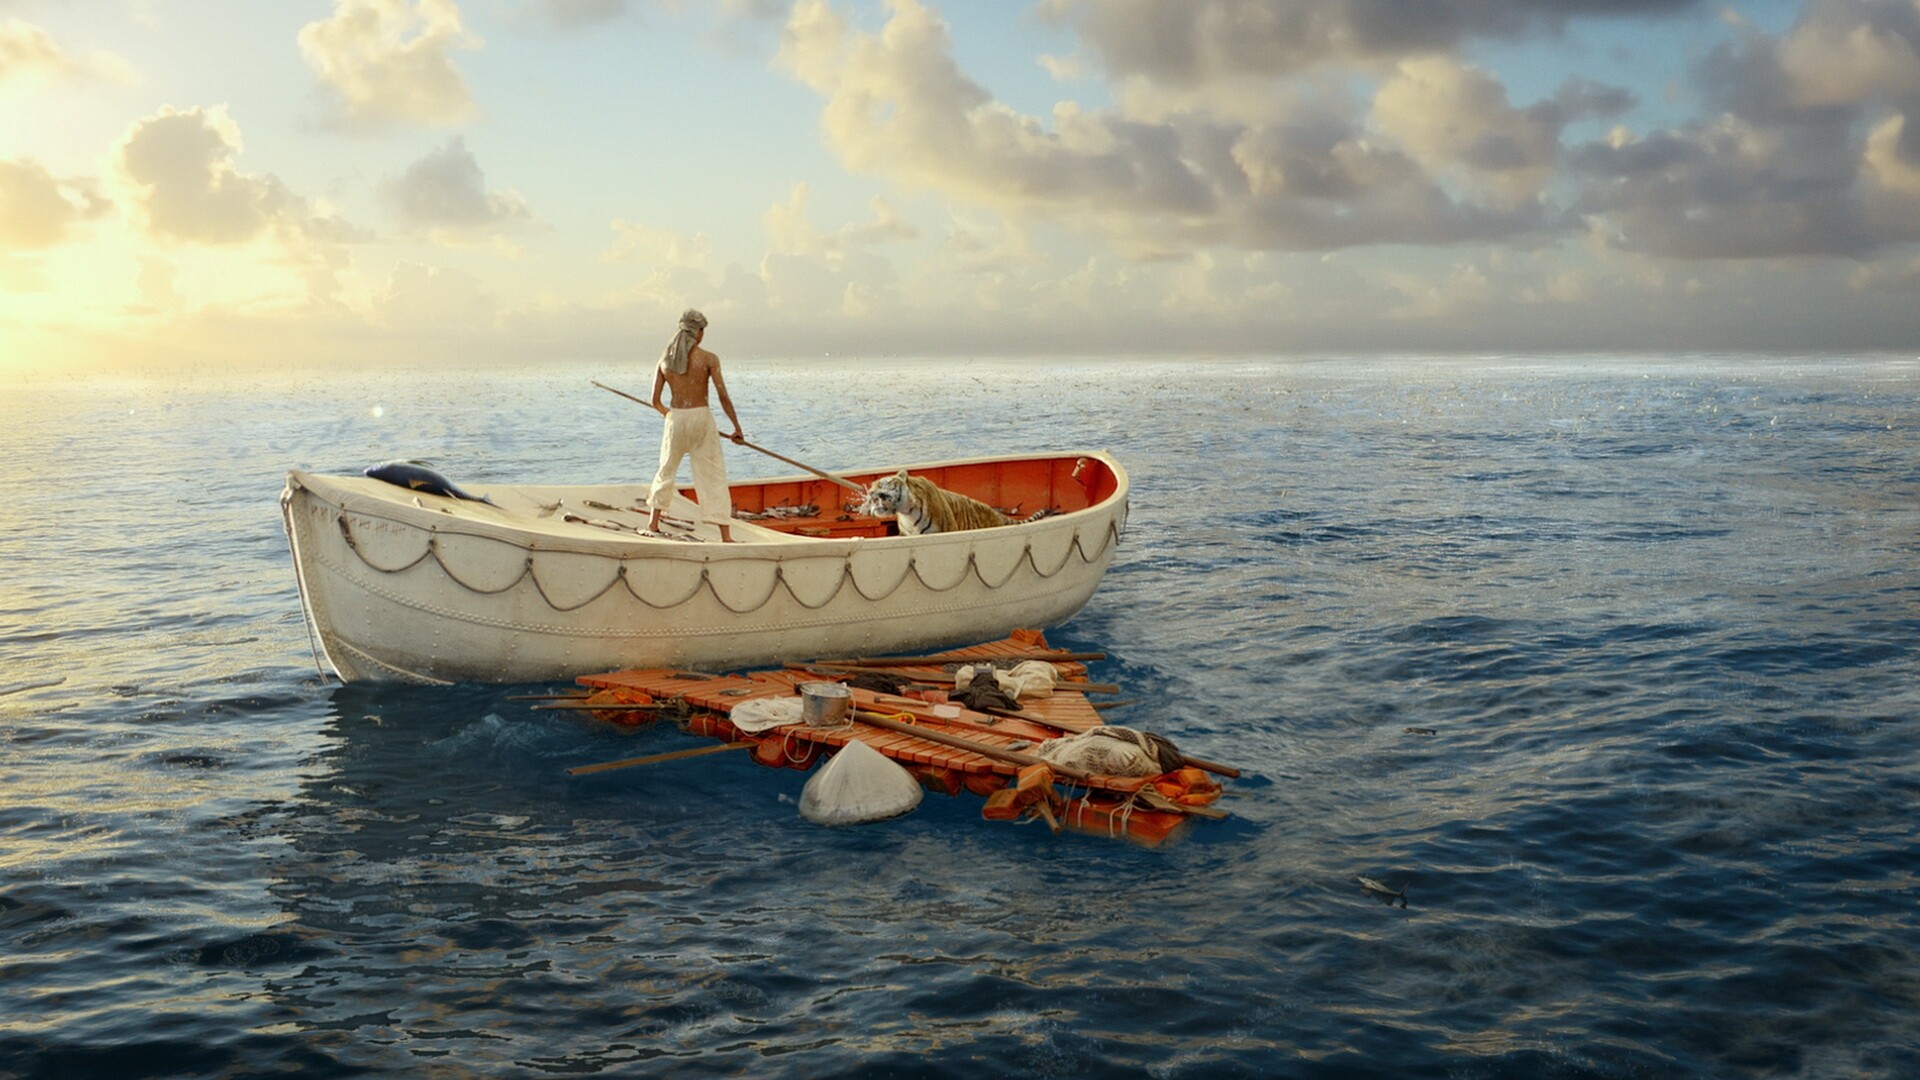 Life of Pi: An exhilarating drama about the mysteries which light up our lives and have no rhyme or reason on their own, the faith that enables us to make a leap into the dark, the teachings of animals, and the powerful instinct we all have for survival. 1920x1080 Full HD Background.